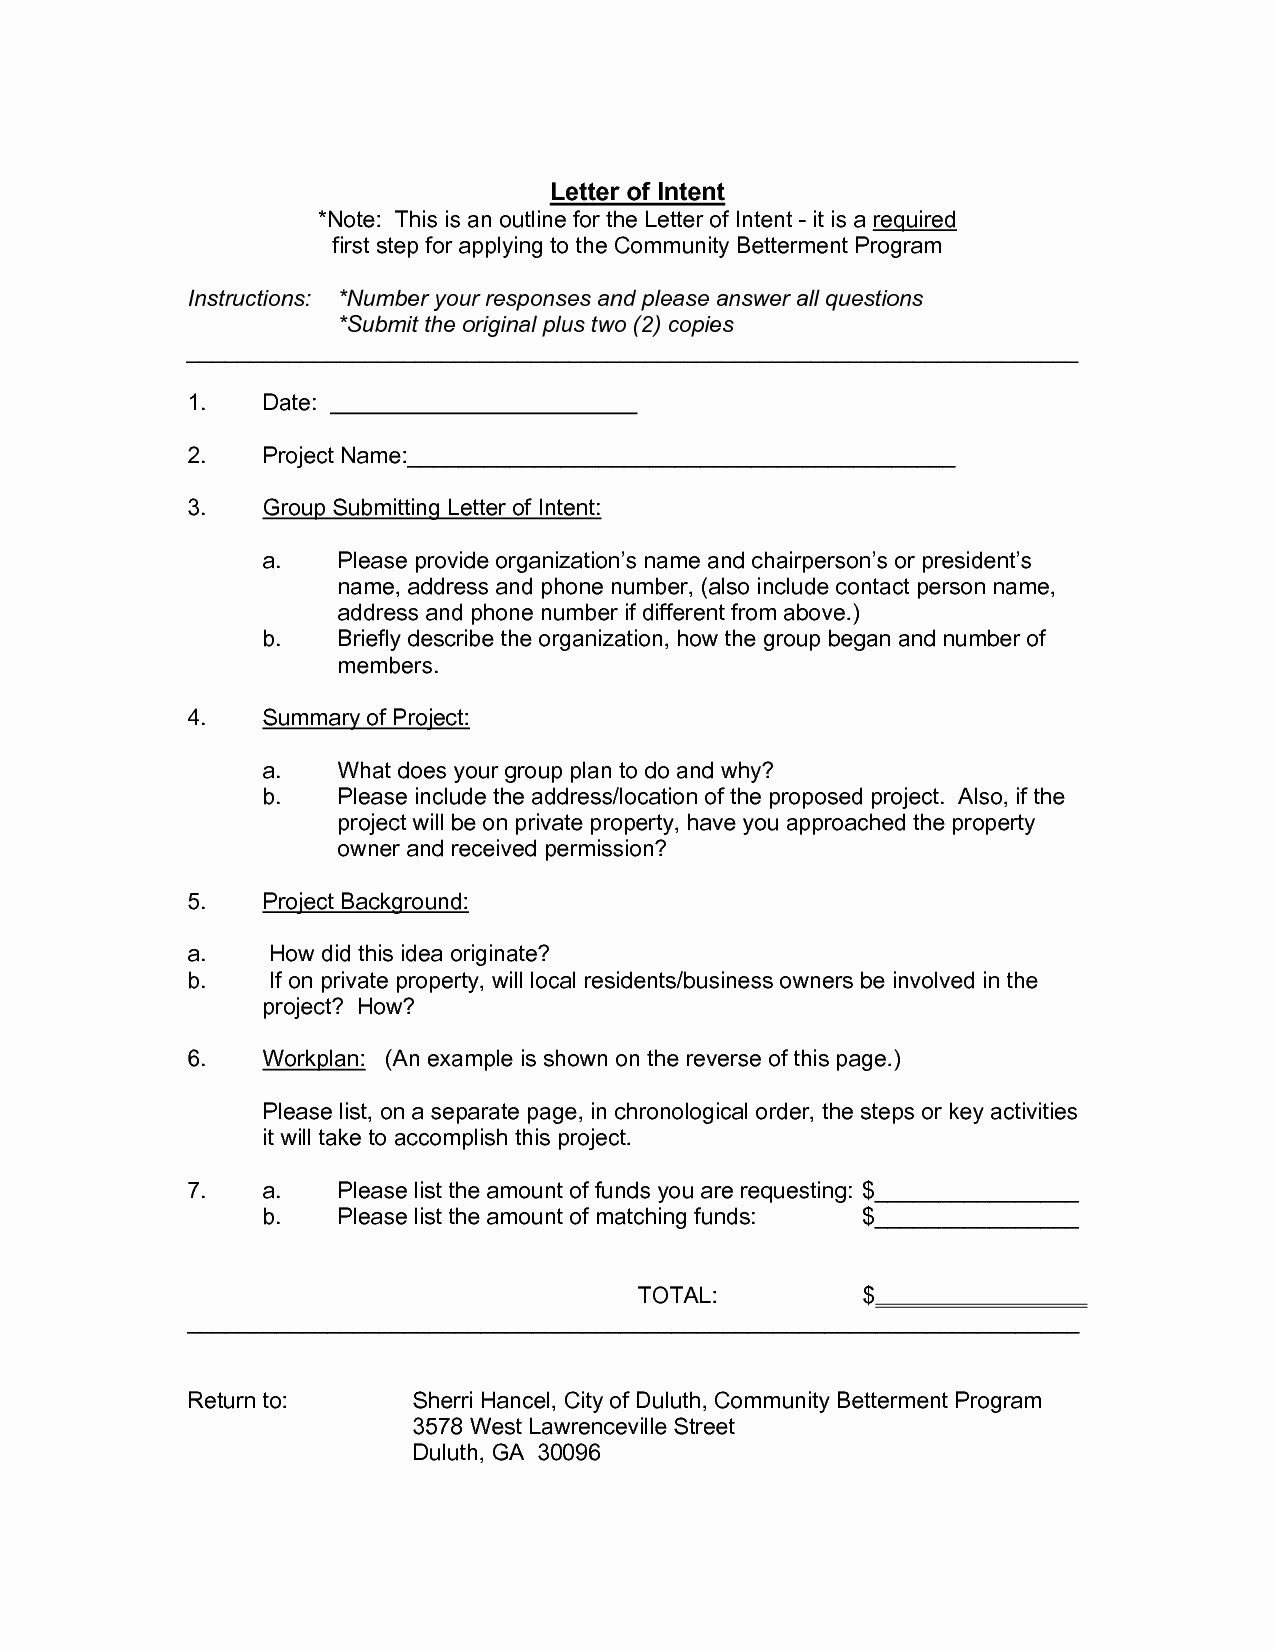 Letter Of Intent Pdf New Pin by Letter Of Intent On Letter Of Intent